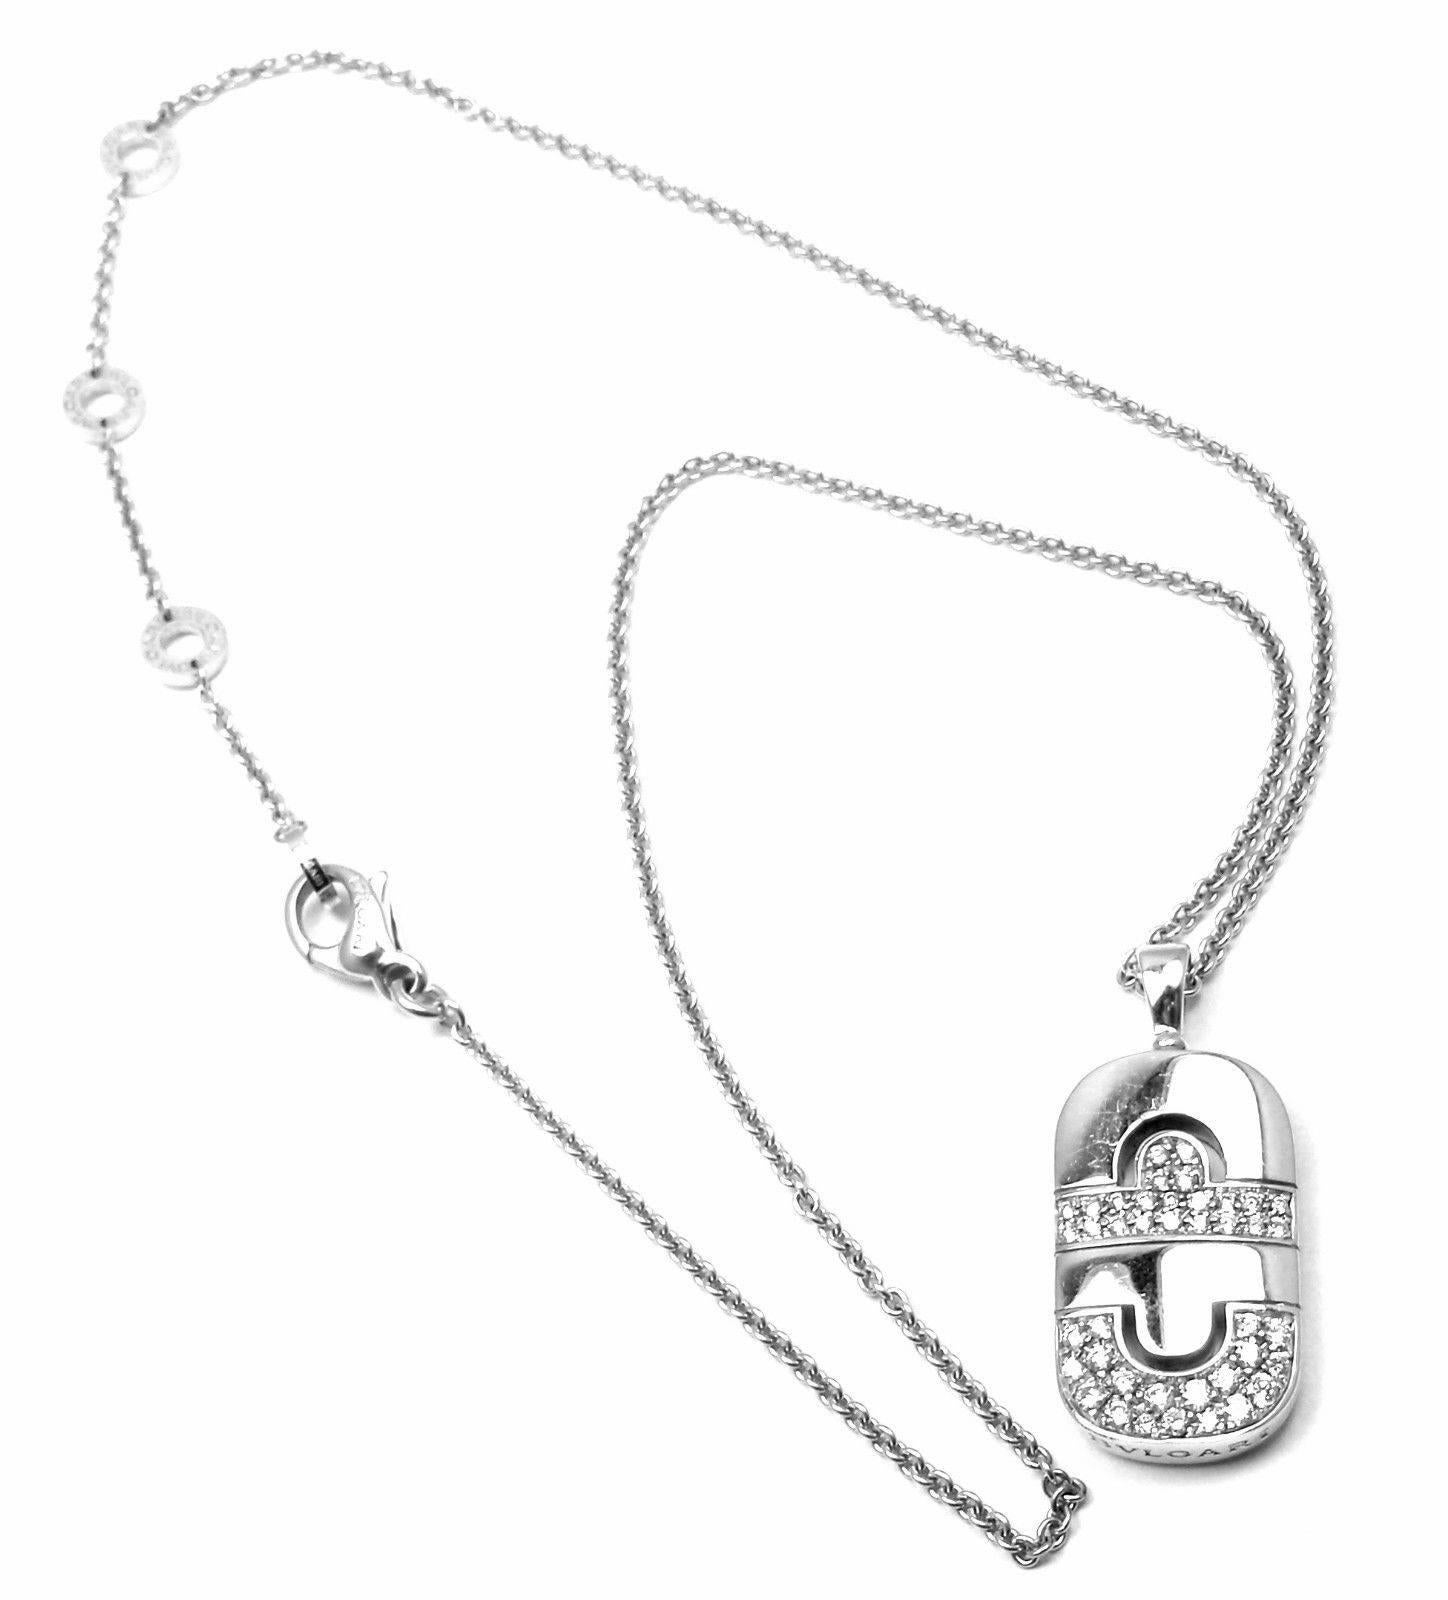 18k White Gold Diamond Parentesi Pendant Necklace by Bulgari. 
With 41 round brilliant cut diamonds VS1 clarity, G color total weight 
approx. 1ct

Details:
Weight: 15.2 grams
Length: 18